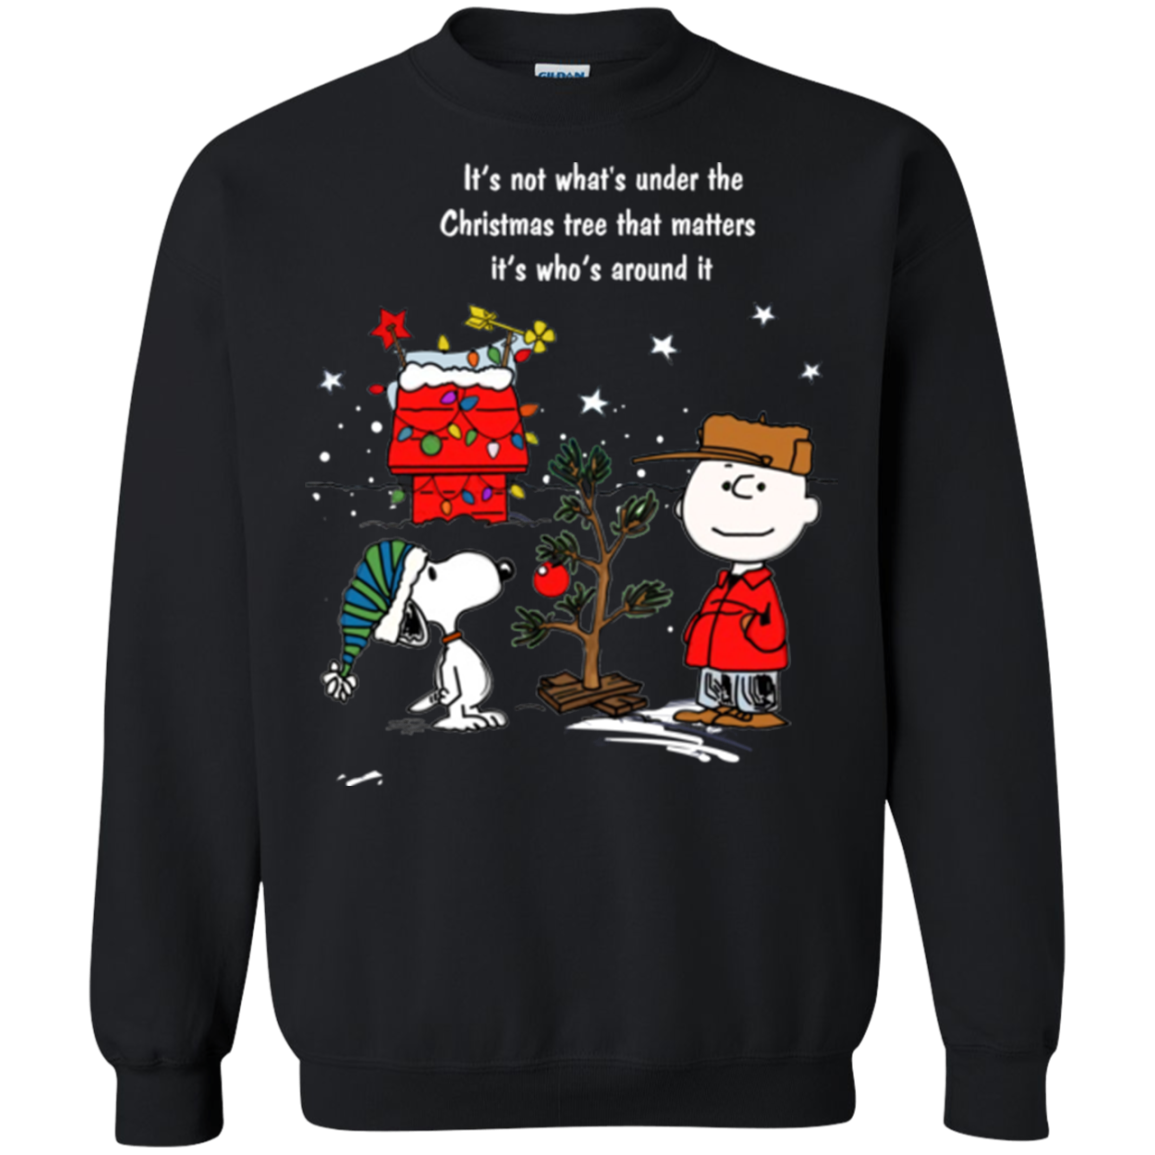 snoopy-it-s-not-what-s-under-the-christmas-tree-that-matters-sweater